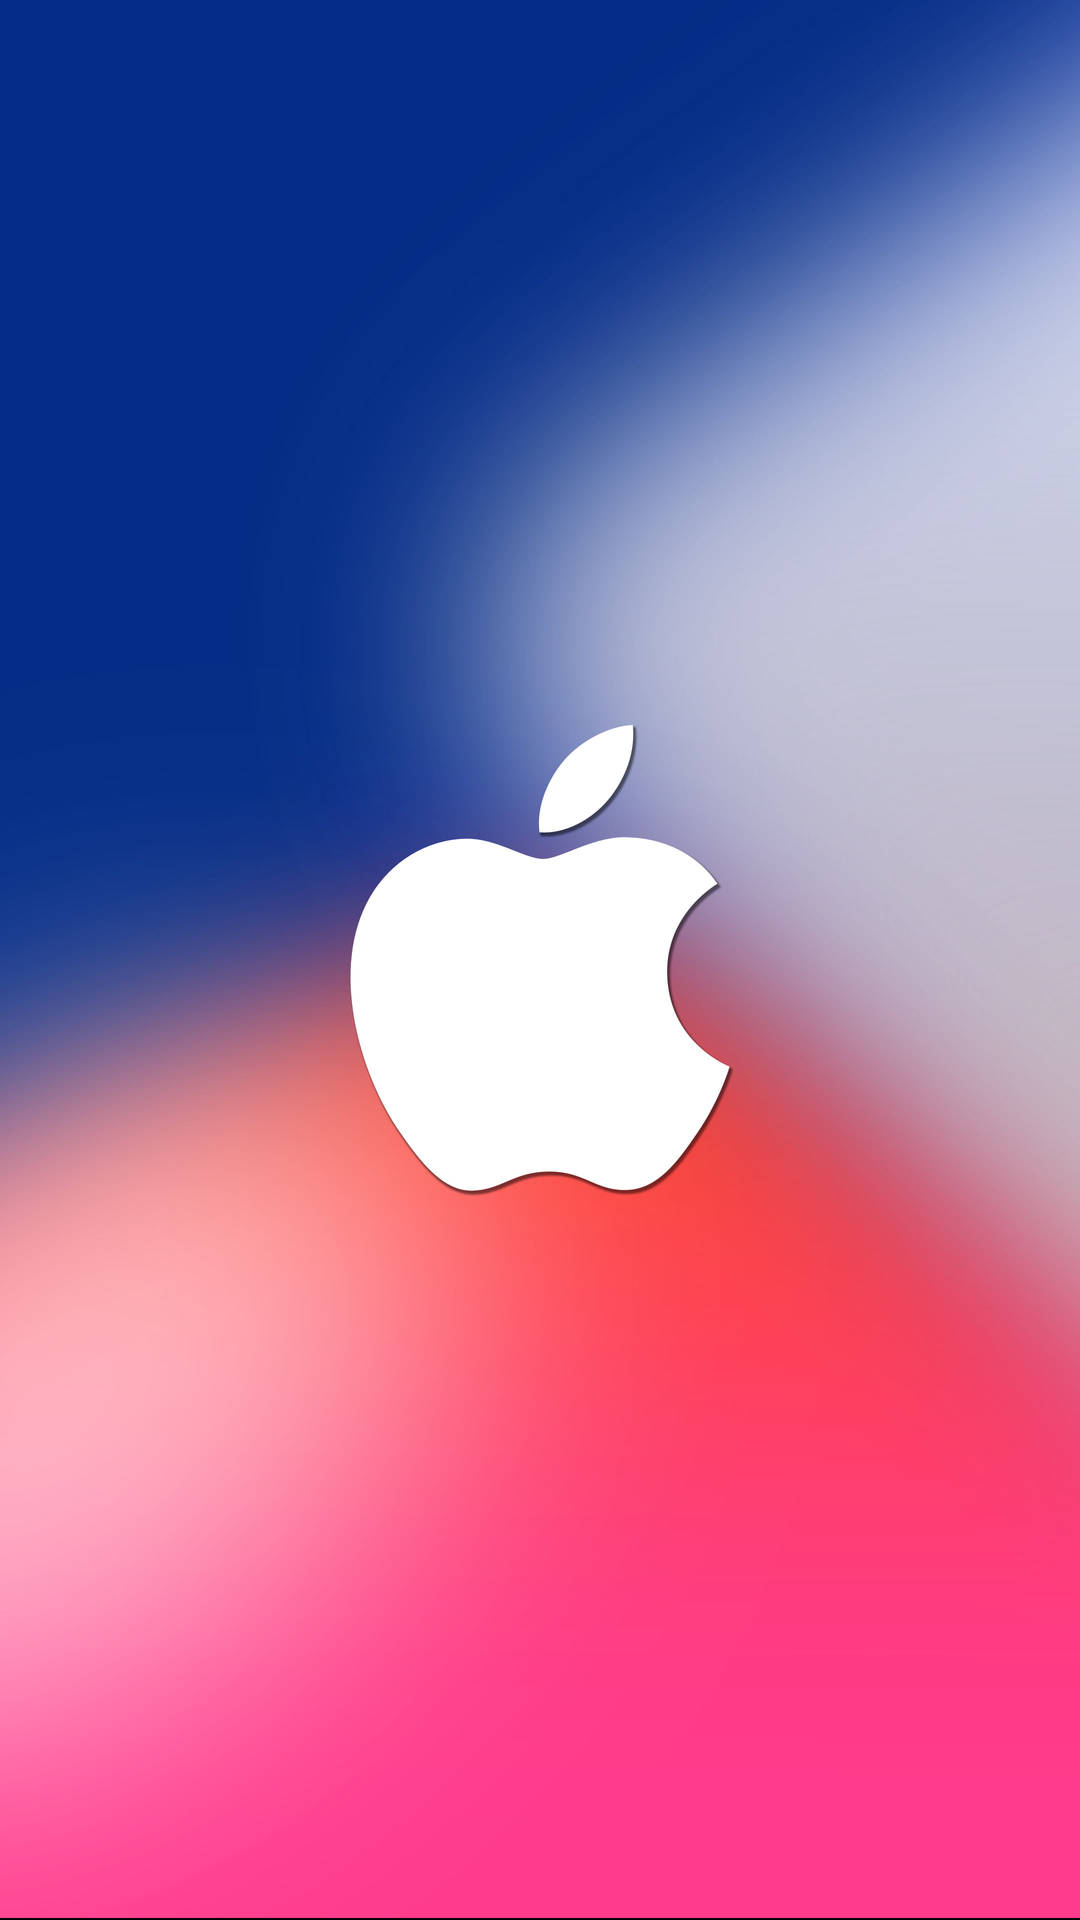 Full Hd White Apple On Multicolored Blur Background